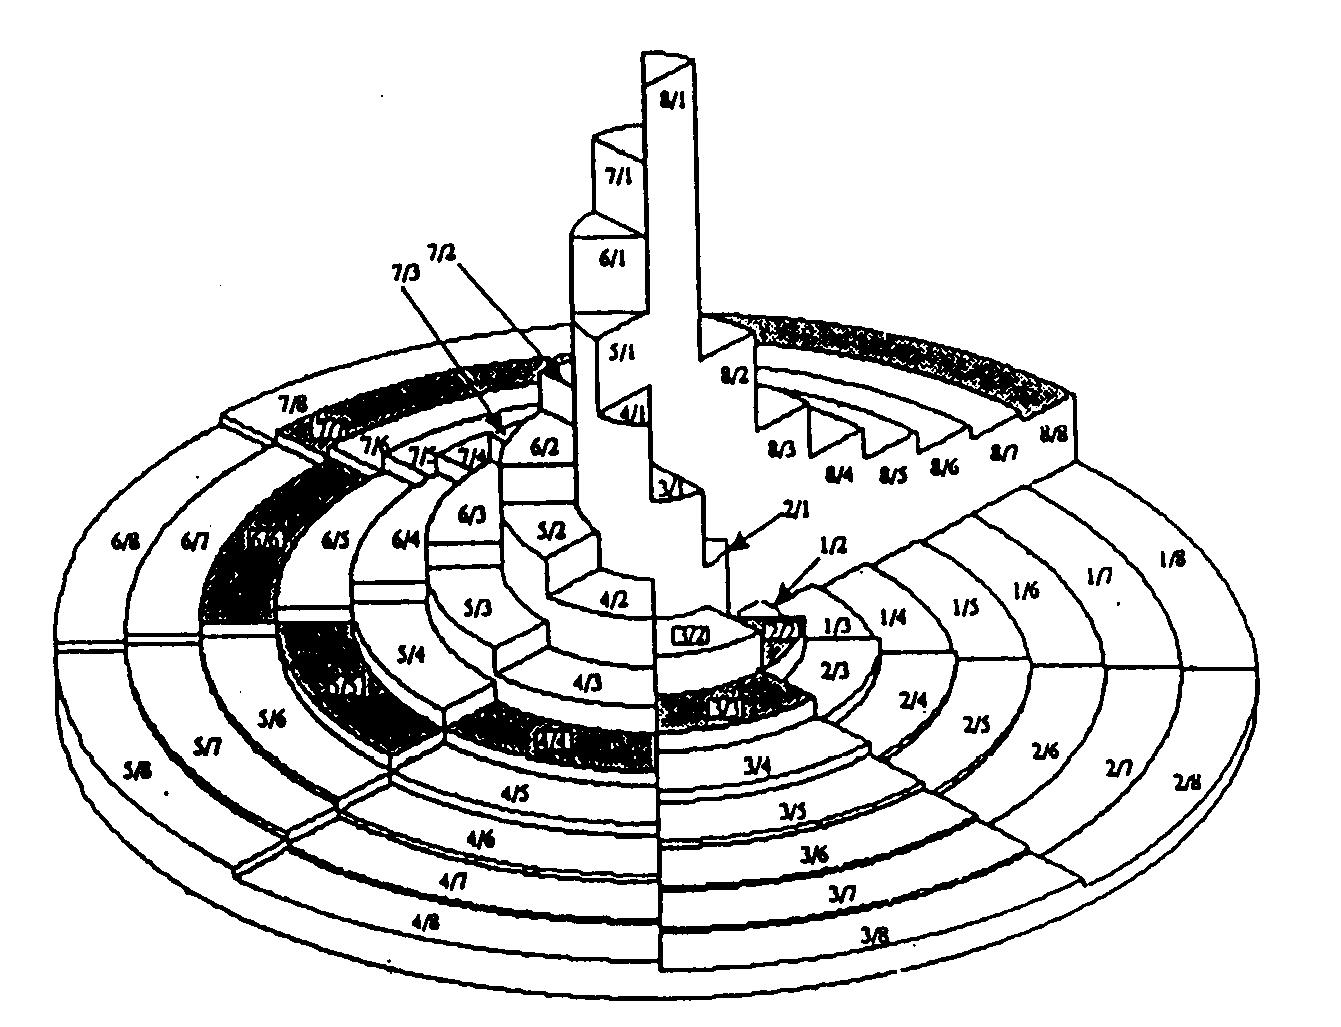 The Lambdoma depicted as a spiral